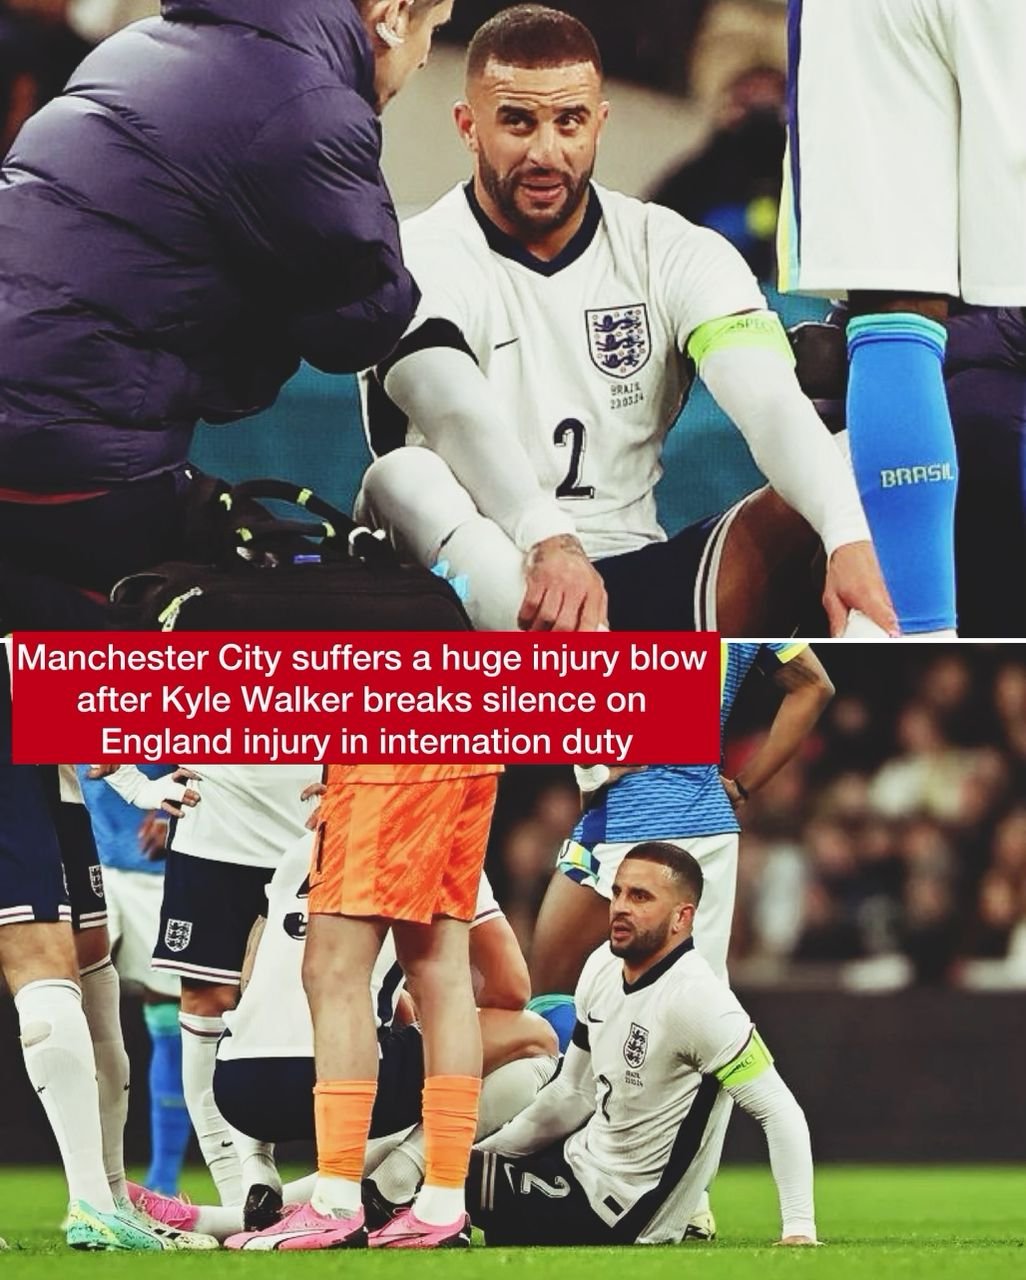 Manchester City suffers a huge injury blow after Kyle Walker breaks silence on England injury in internation duty